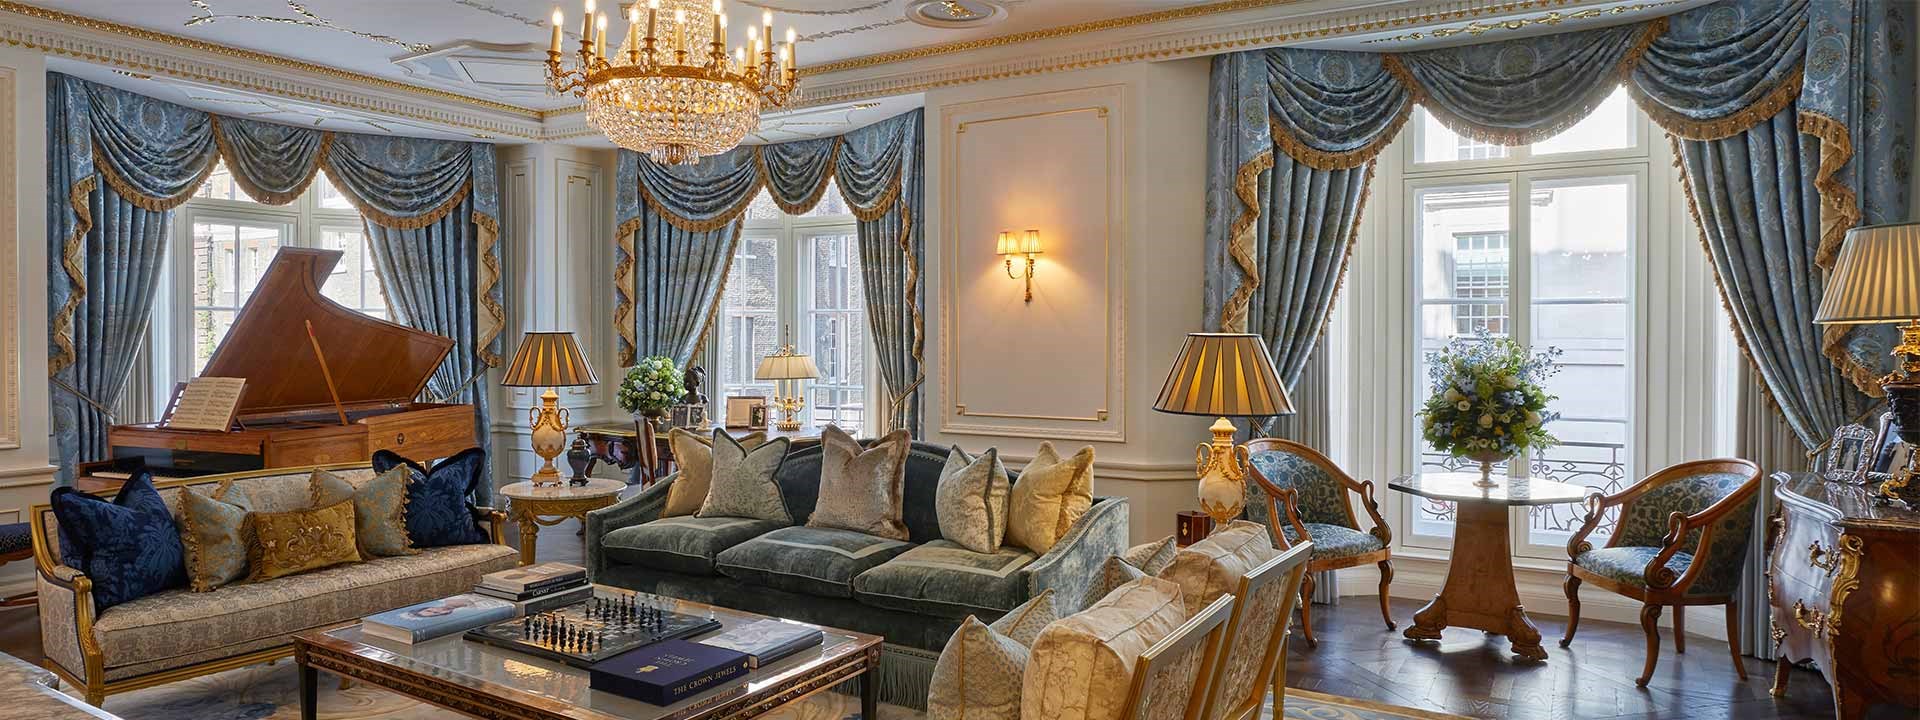 Part of the Royal Suite, full of rich history and with an original Gilbert and Sullivan grand piano.